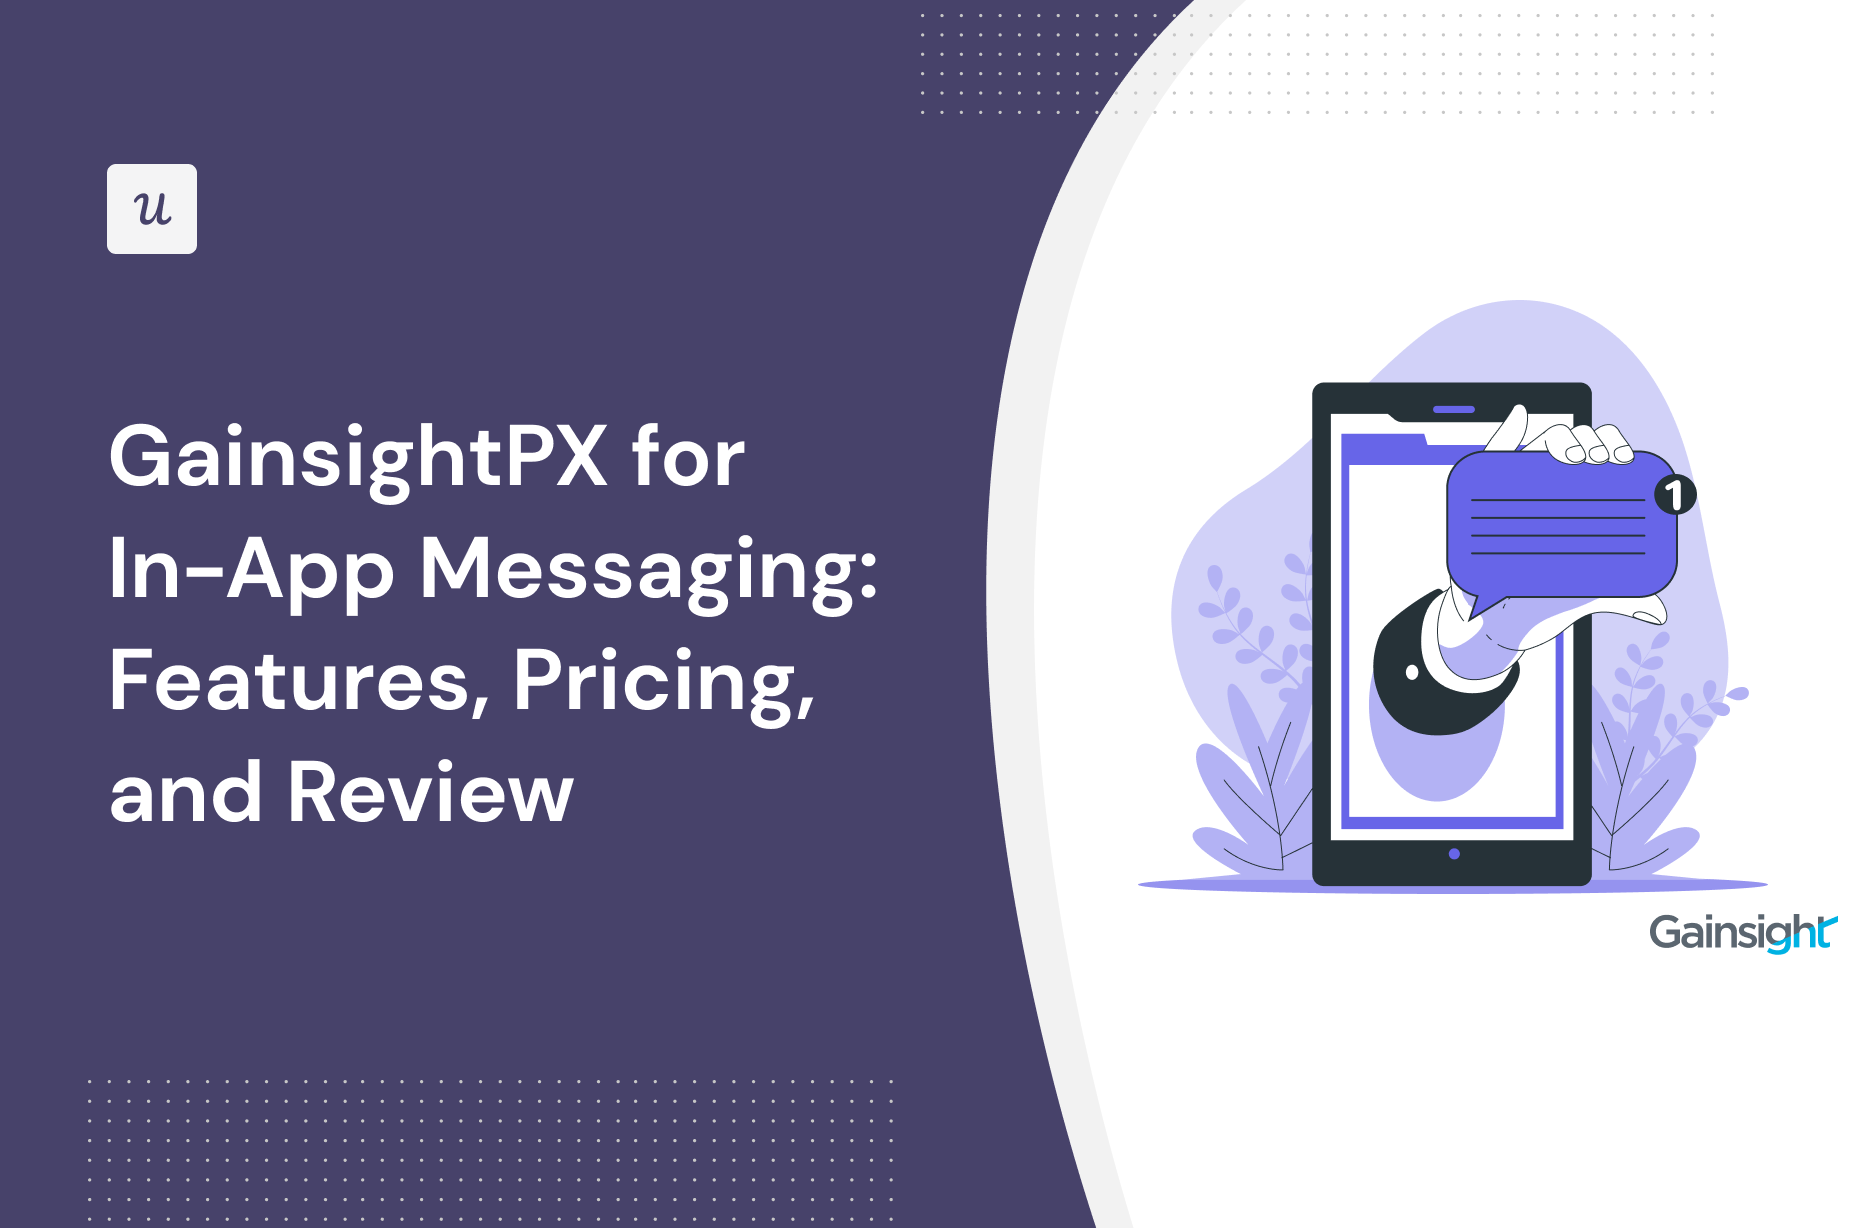 GainsightPX for In-App Messaging: Features, Pricing, and Review